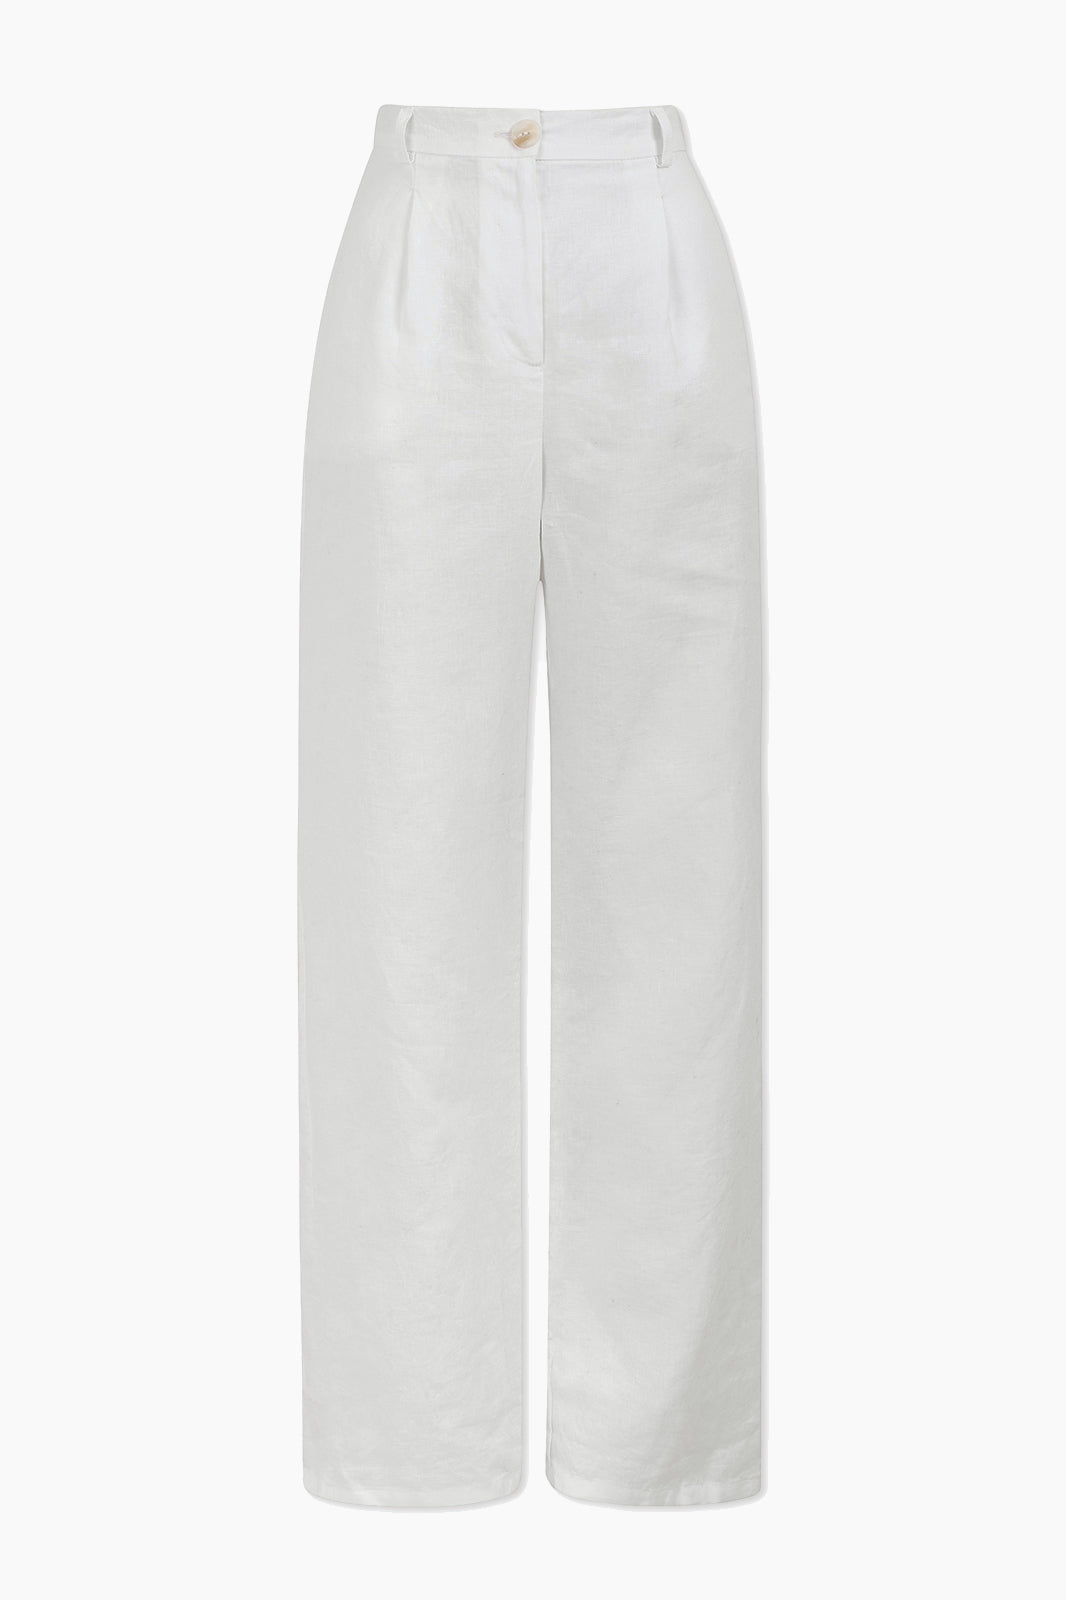 Naz women's tailored linen pants in white. High-waisted wide leg fit. Made in Portugal with lasting quality. 